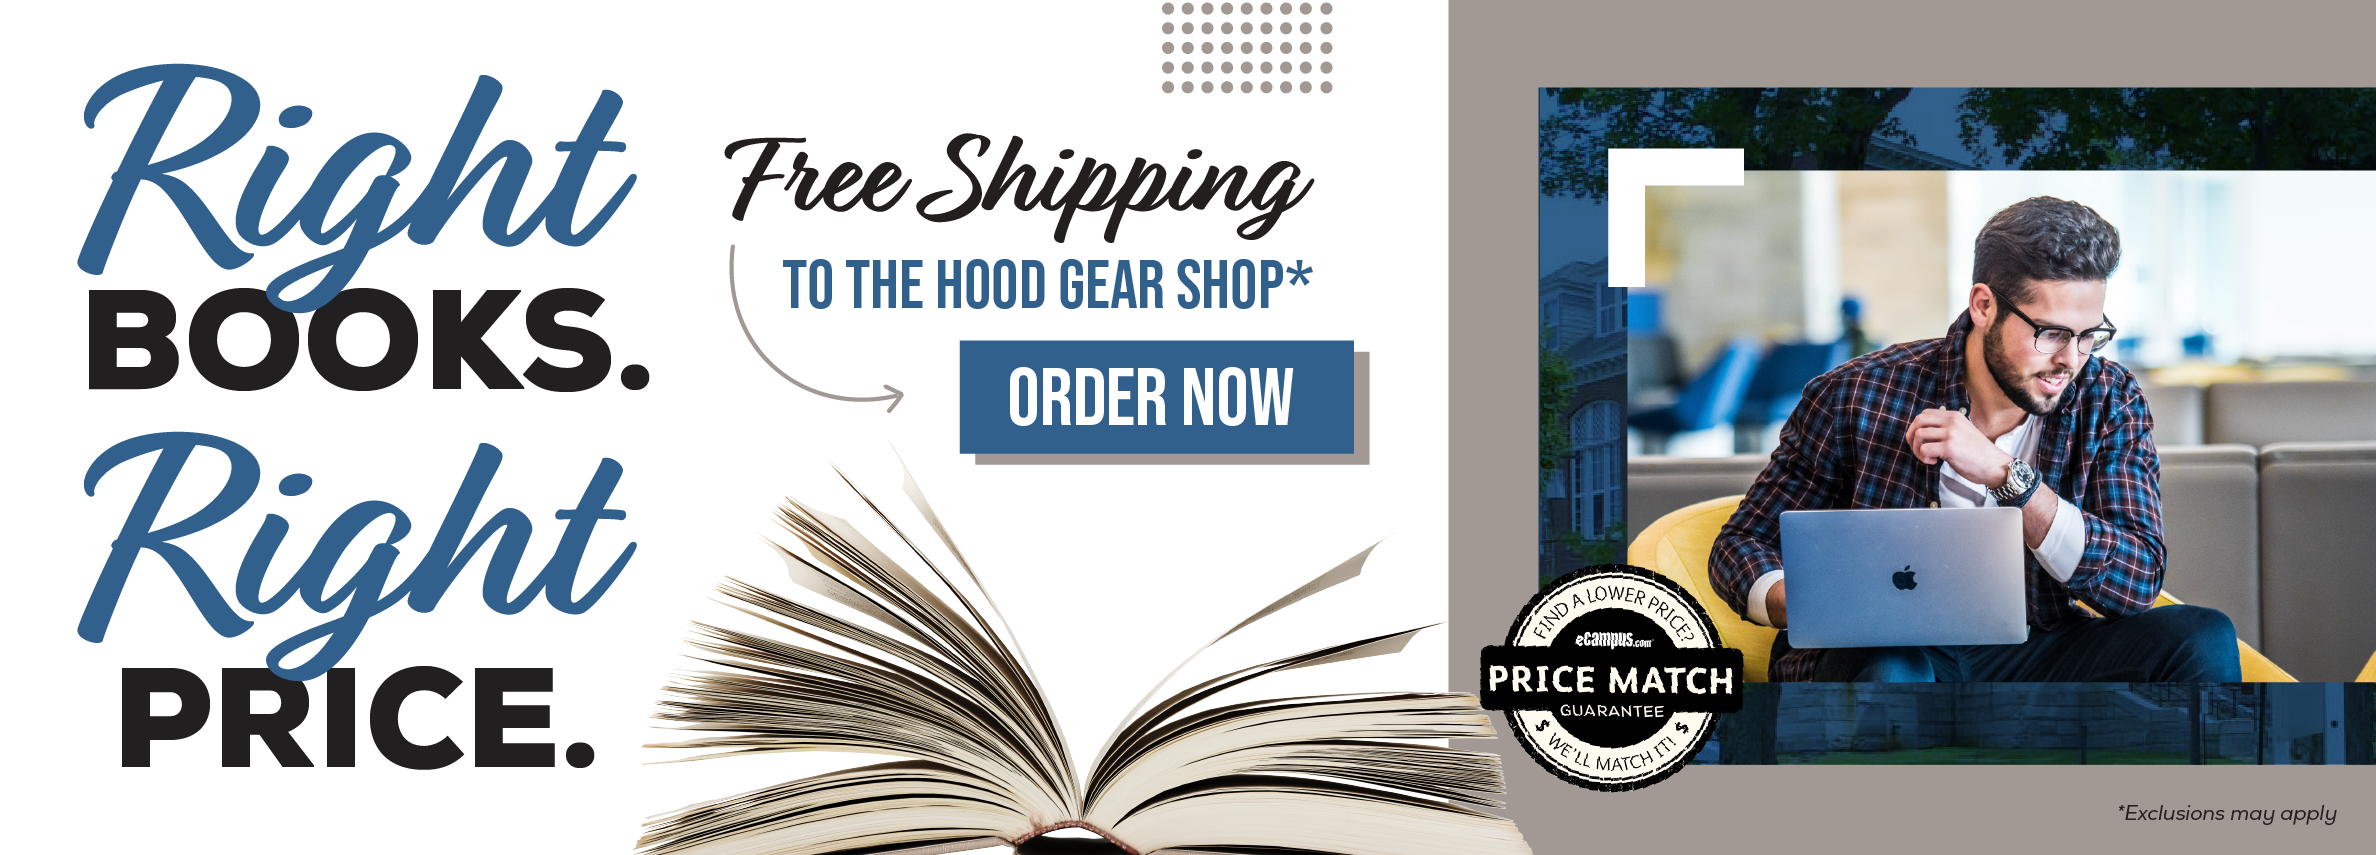 Right books. Right price. Free shipping to the Hood Gear Shop.* Order now. Price Match Guarantee. *Exclusions may apply.